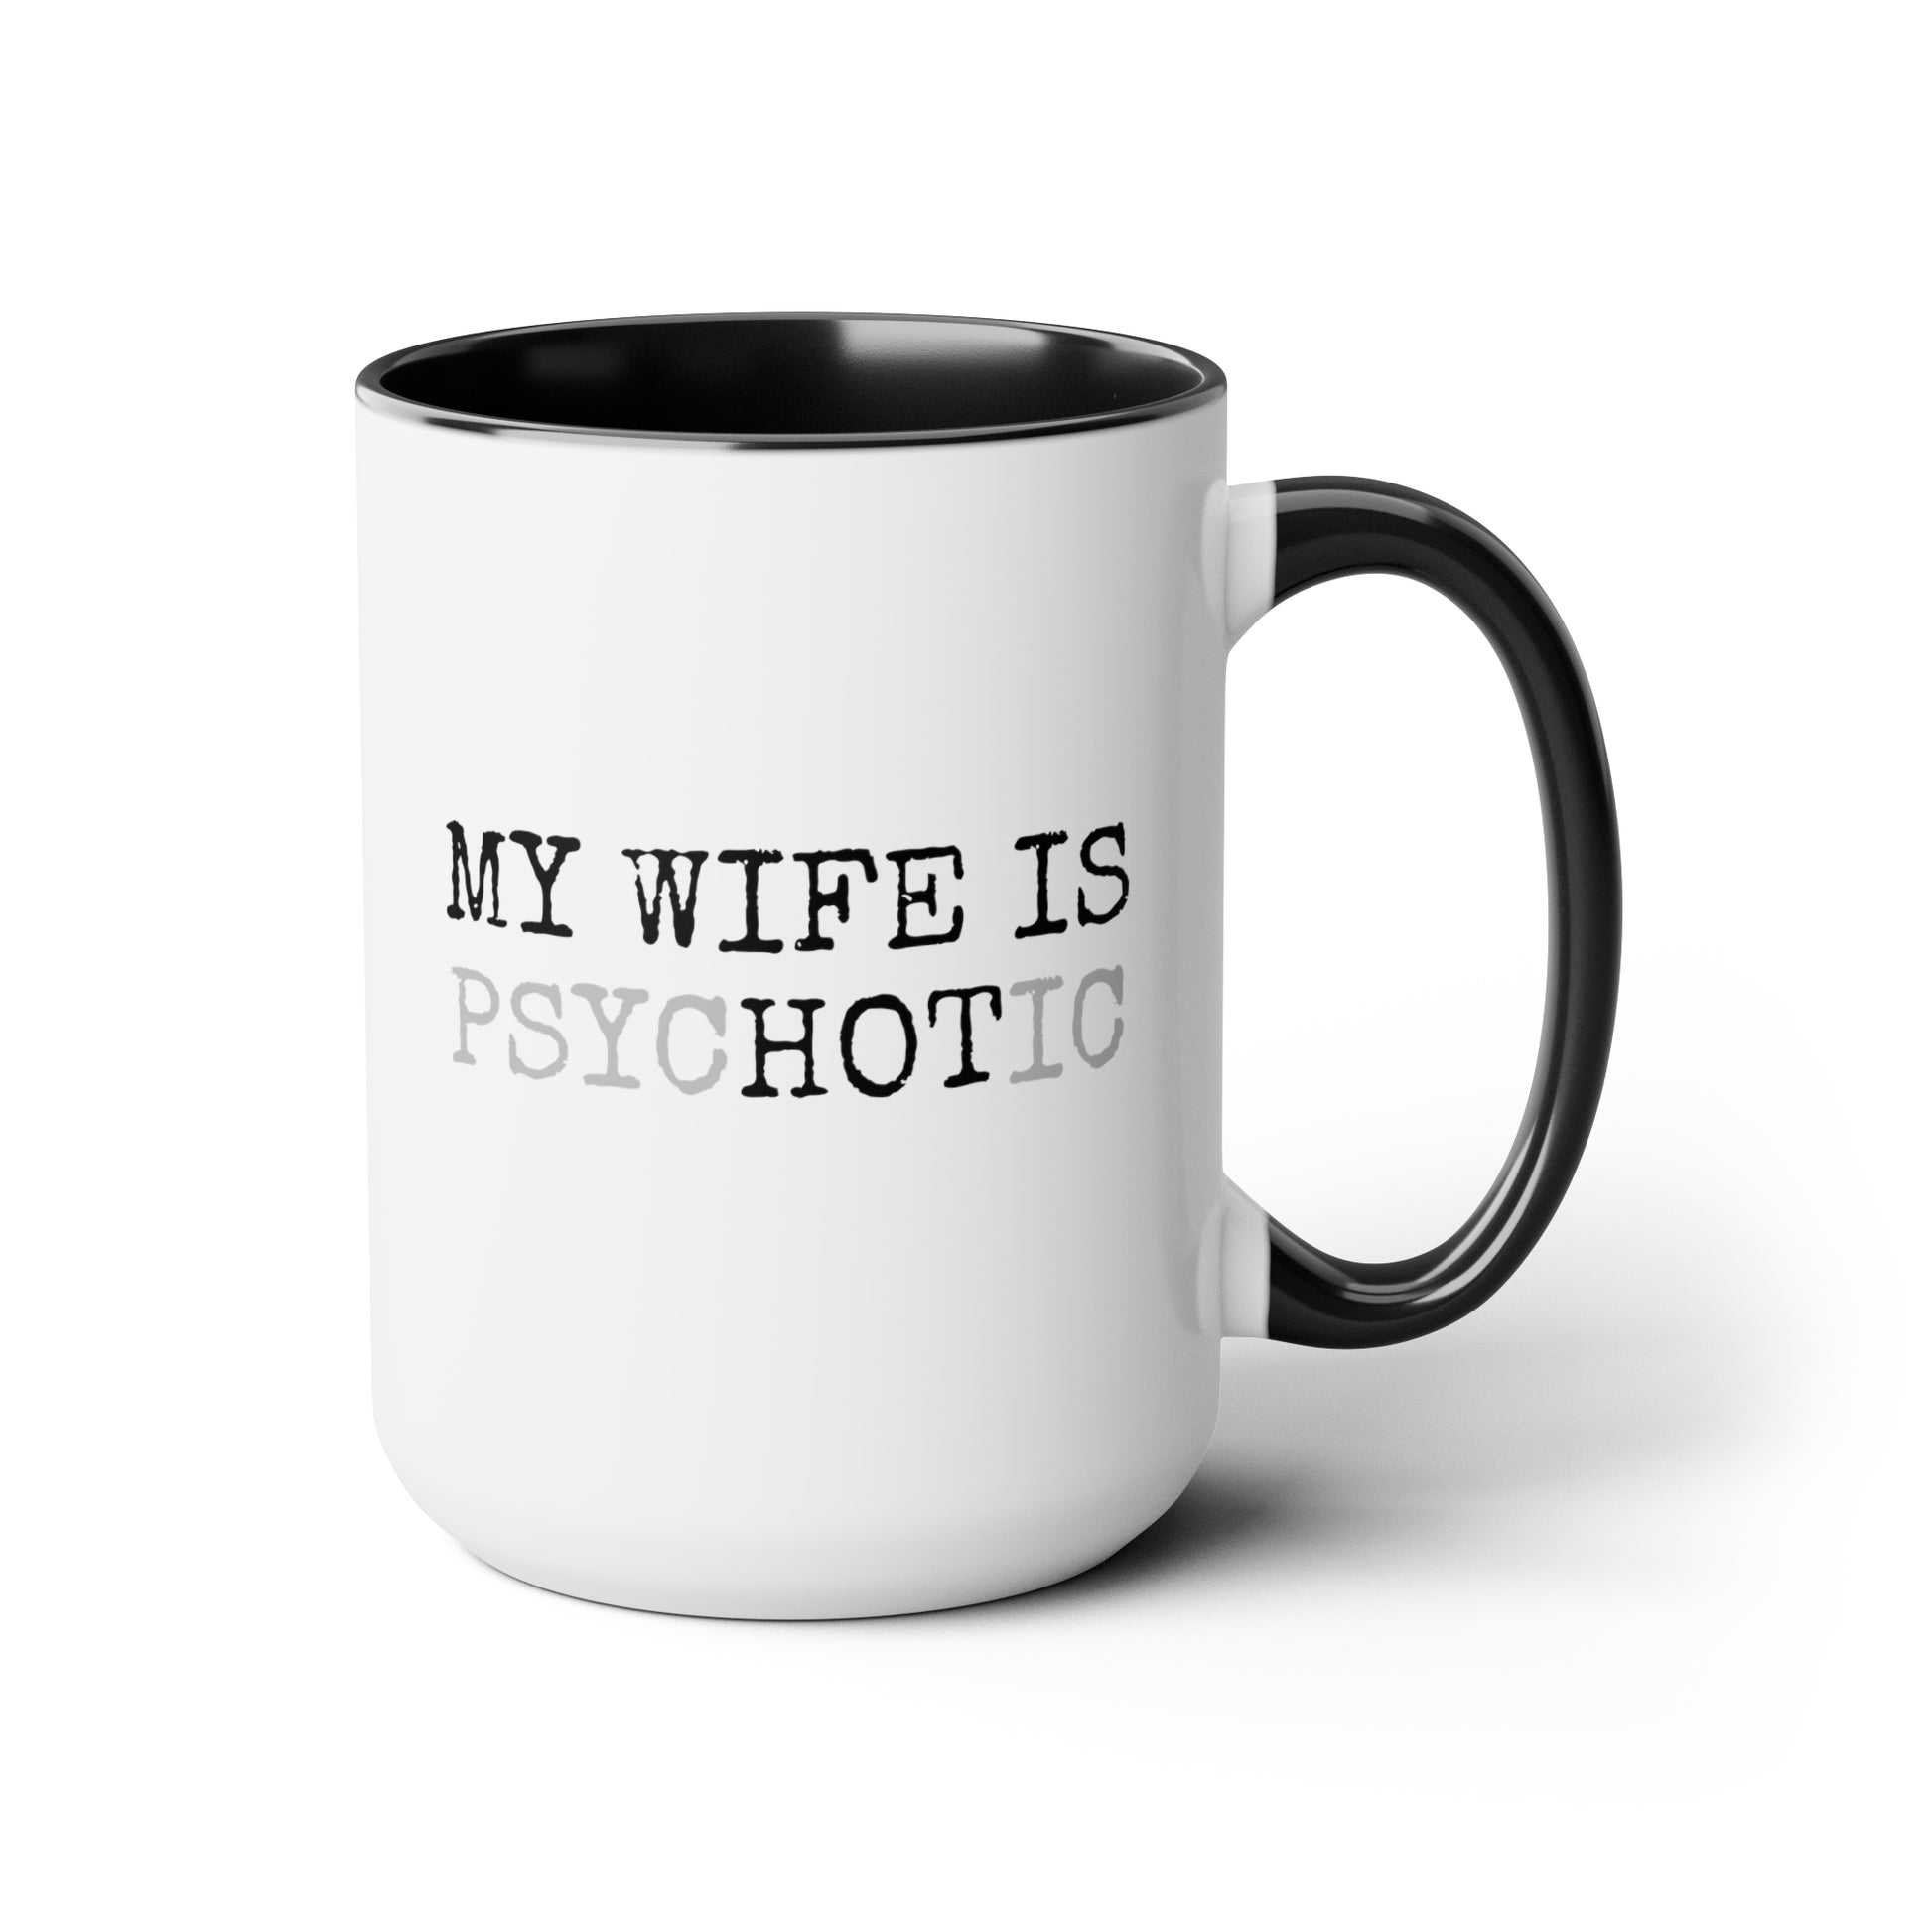 My Wife Is Hot Psychotic 15oz white with black accent funny large coffee mug gift for him boyfriend husband rude curse valentines anniversary waveywares wavey wares wavywares wavy wares